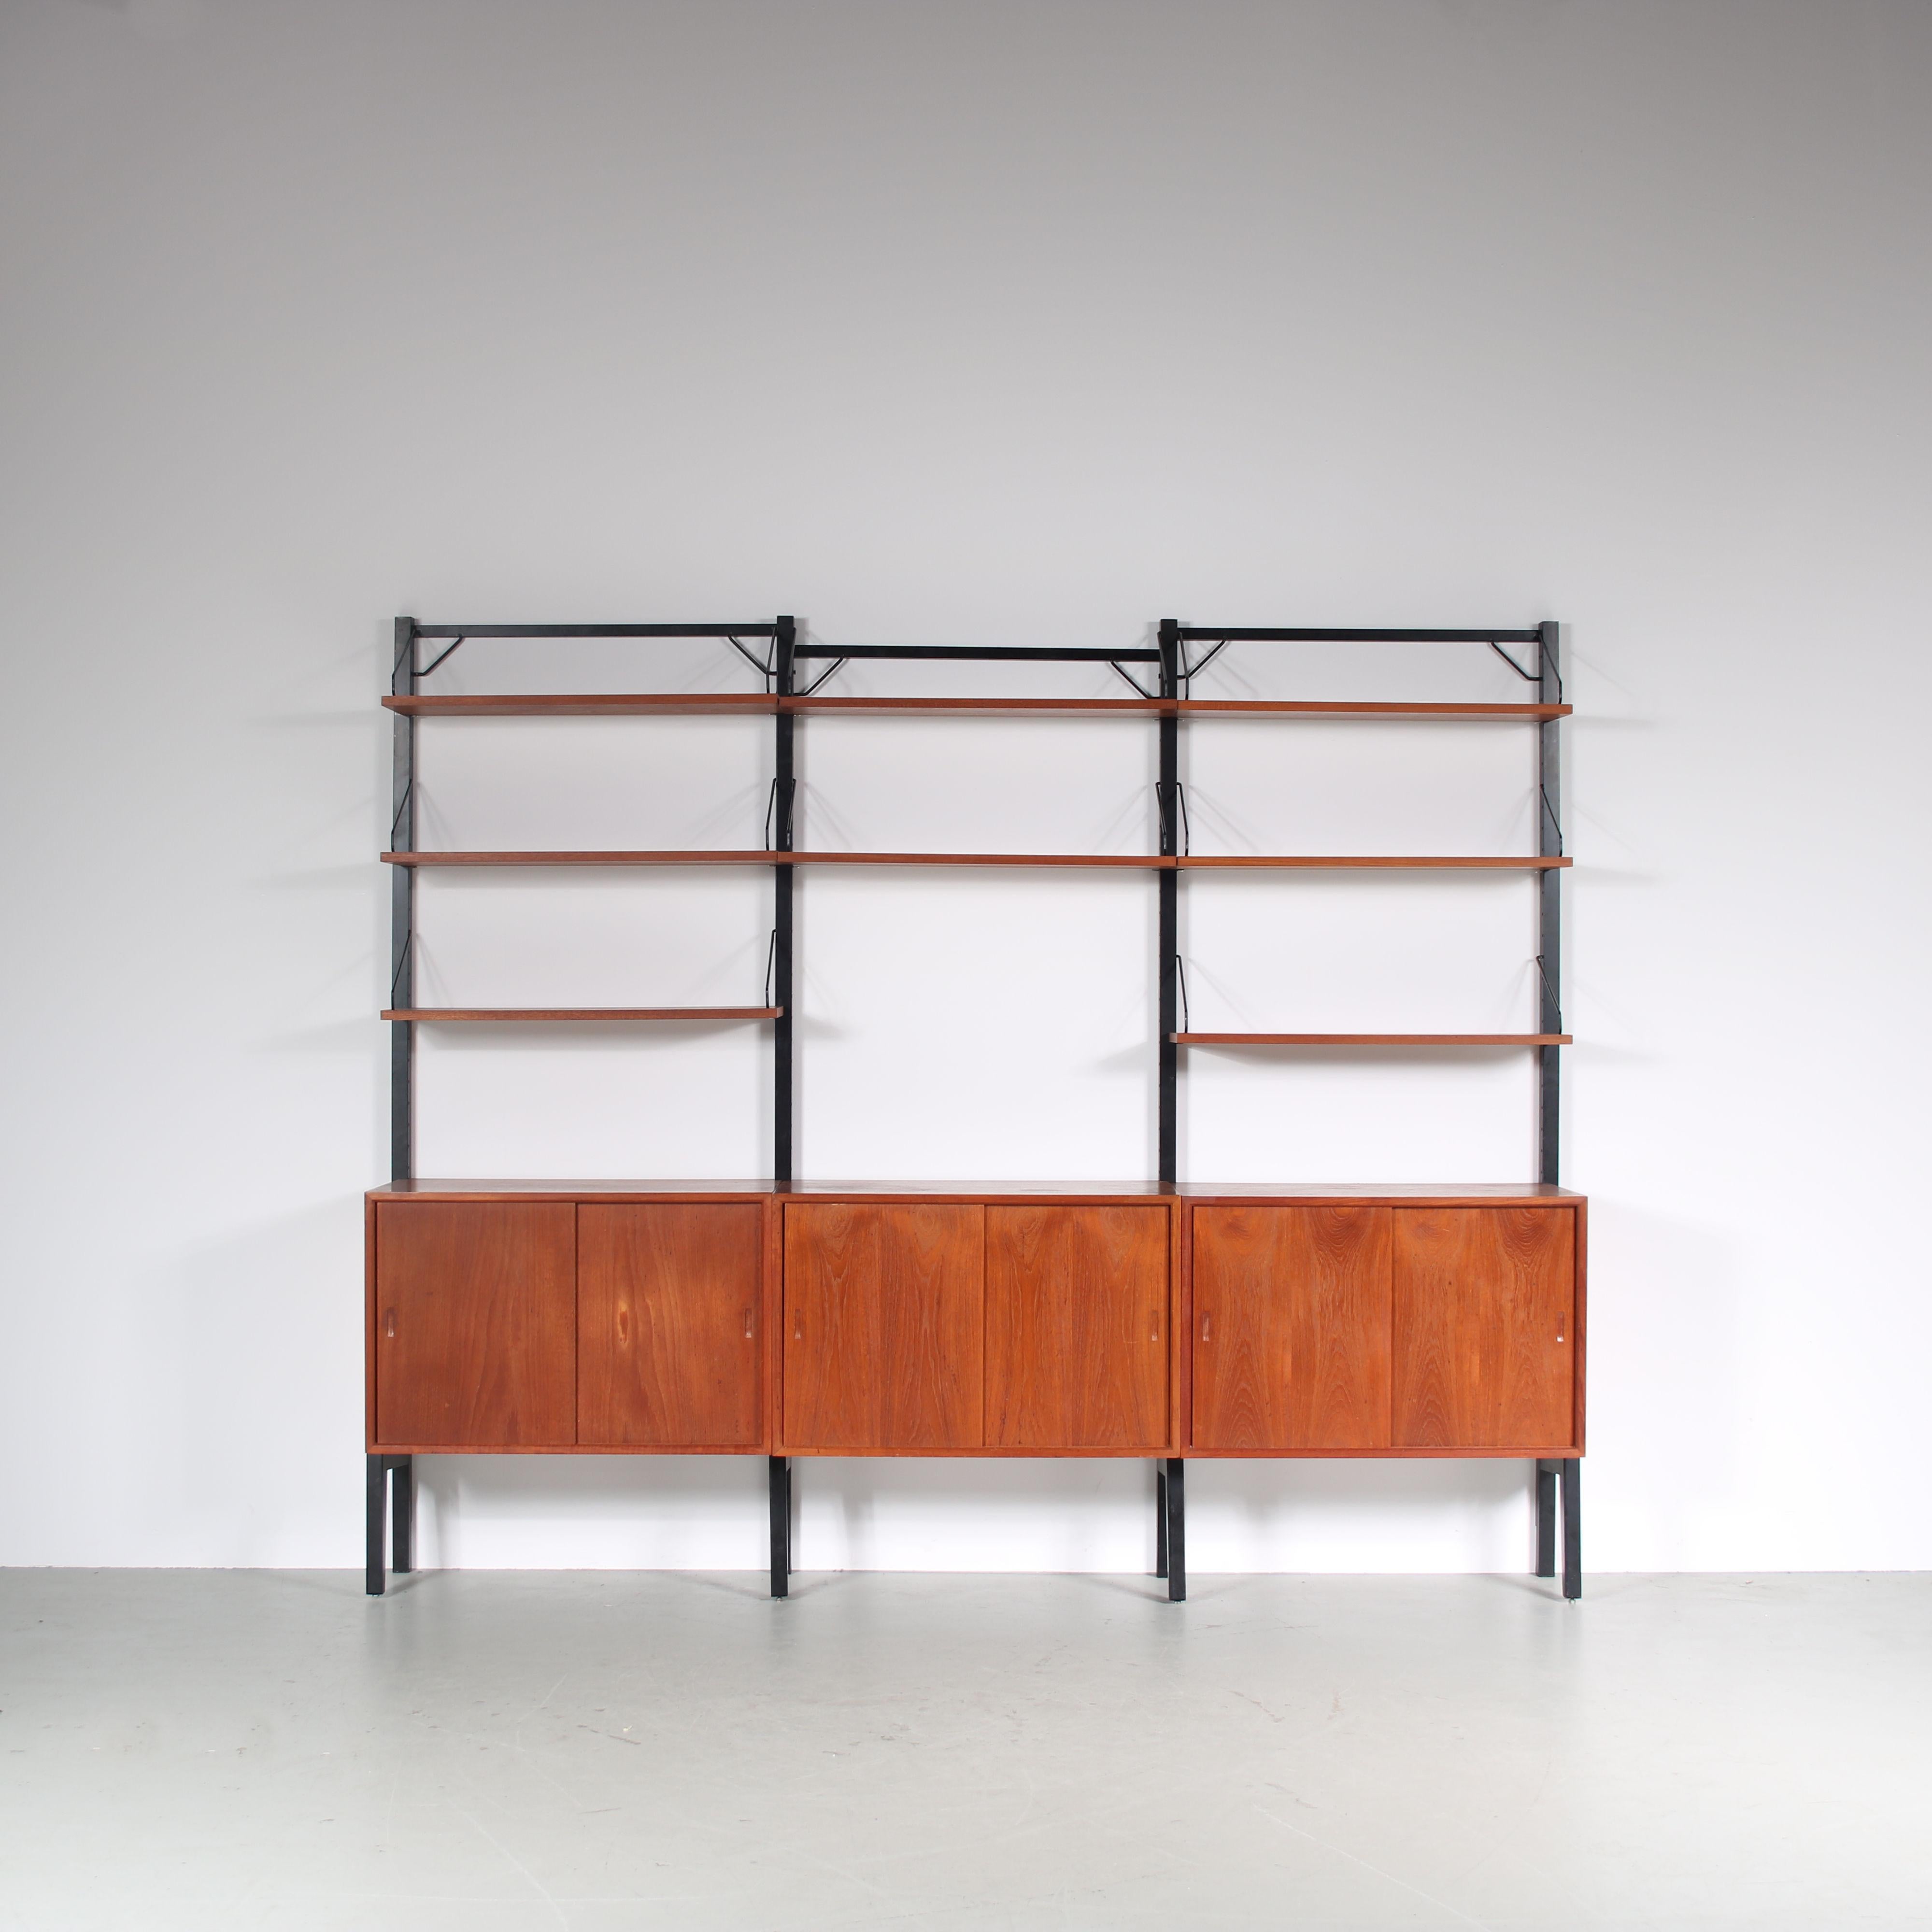 An eye-catching wall mounted system cabinet designed by Poul Cadovius, manufactured by Royal System in Denmark around 1960.

A beautiful piece made of teak wood in a warm brown colour. It is three units wide, having multiple shelves held by elegant